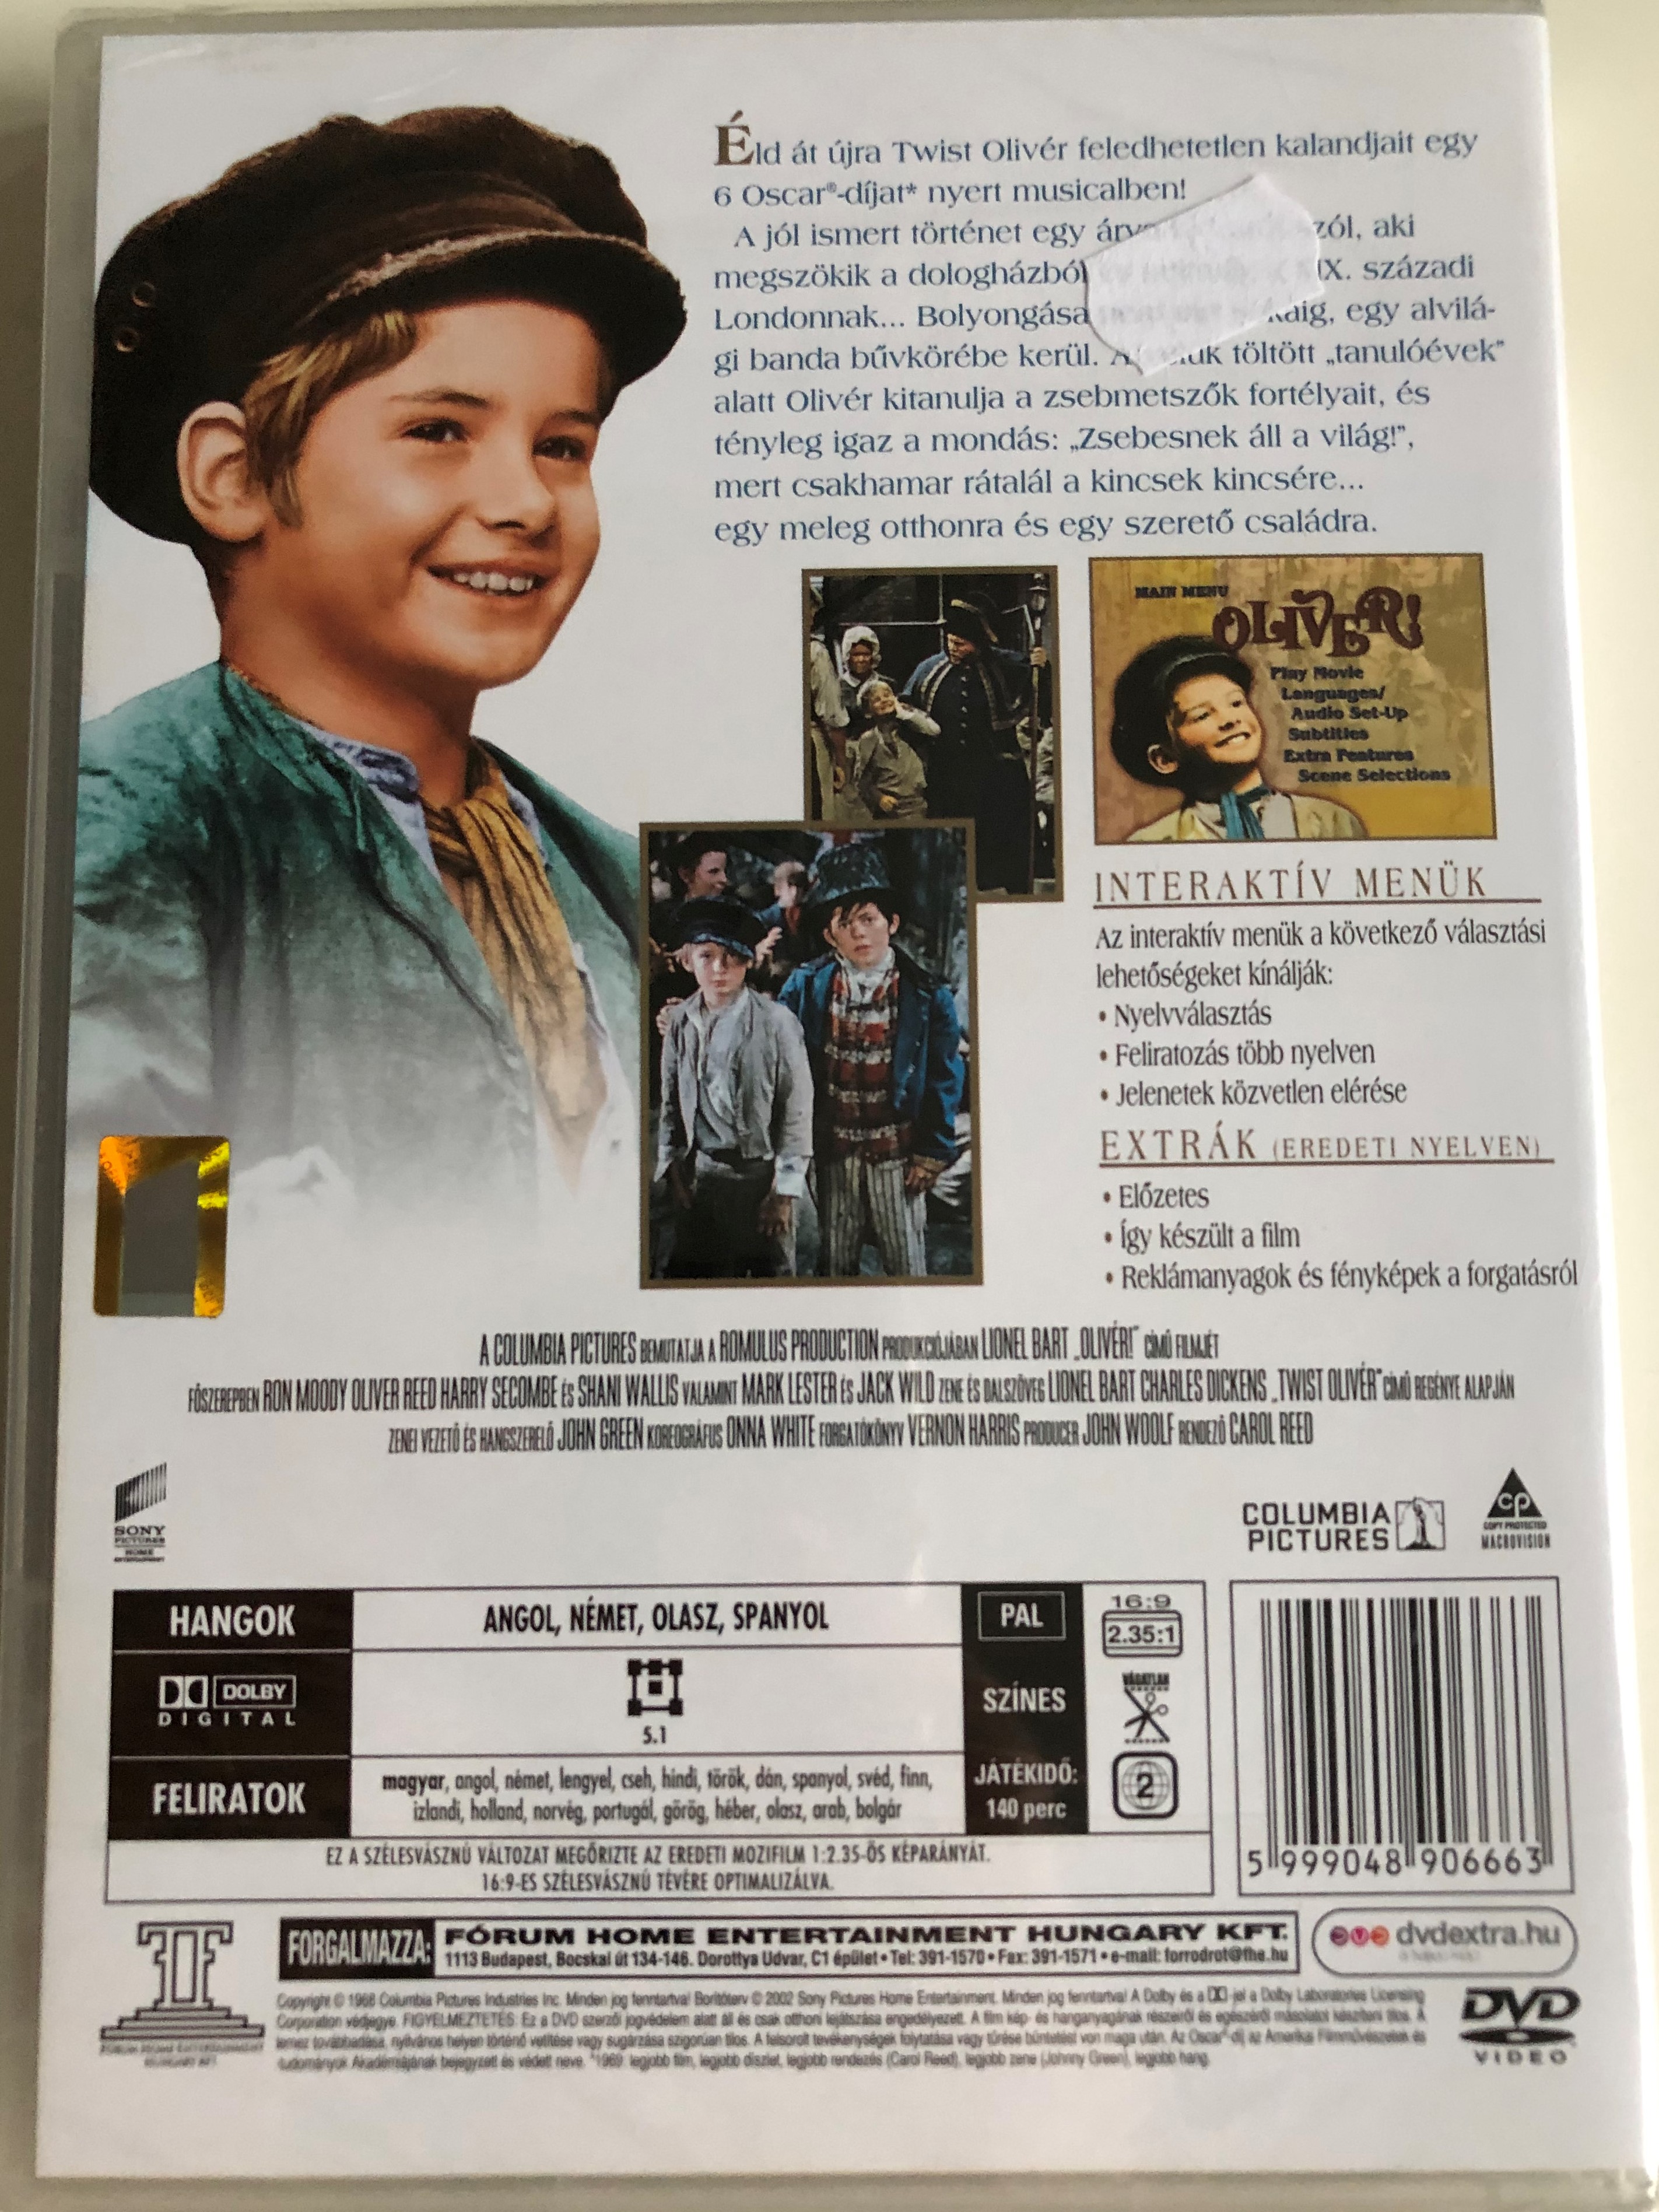 Oliver! DVD 1968 Olivér! / Directed by Carol Reed / Starring: Ron Moody,  Oliver Reed, Harry Secombe, Shani Wallis / 30th year anniversary edition -  bibleinmylanguage